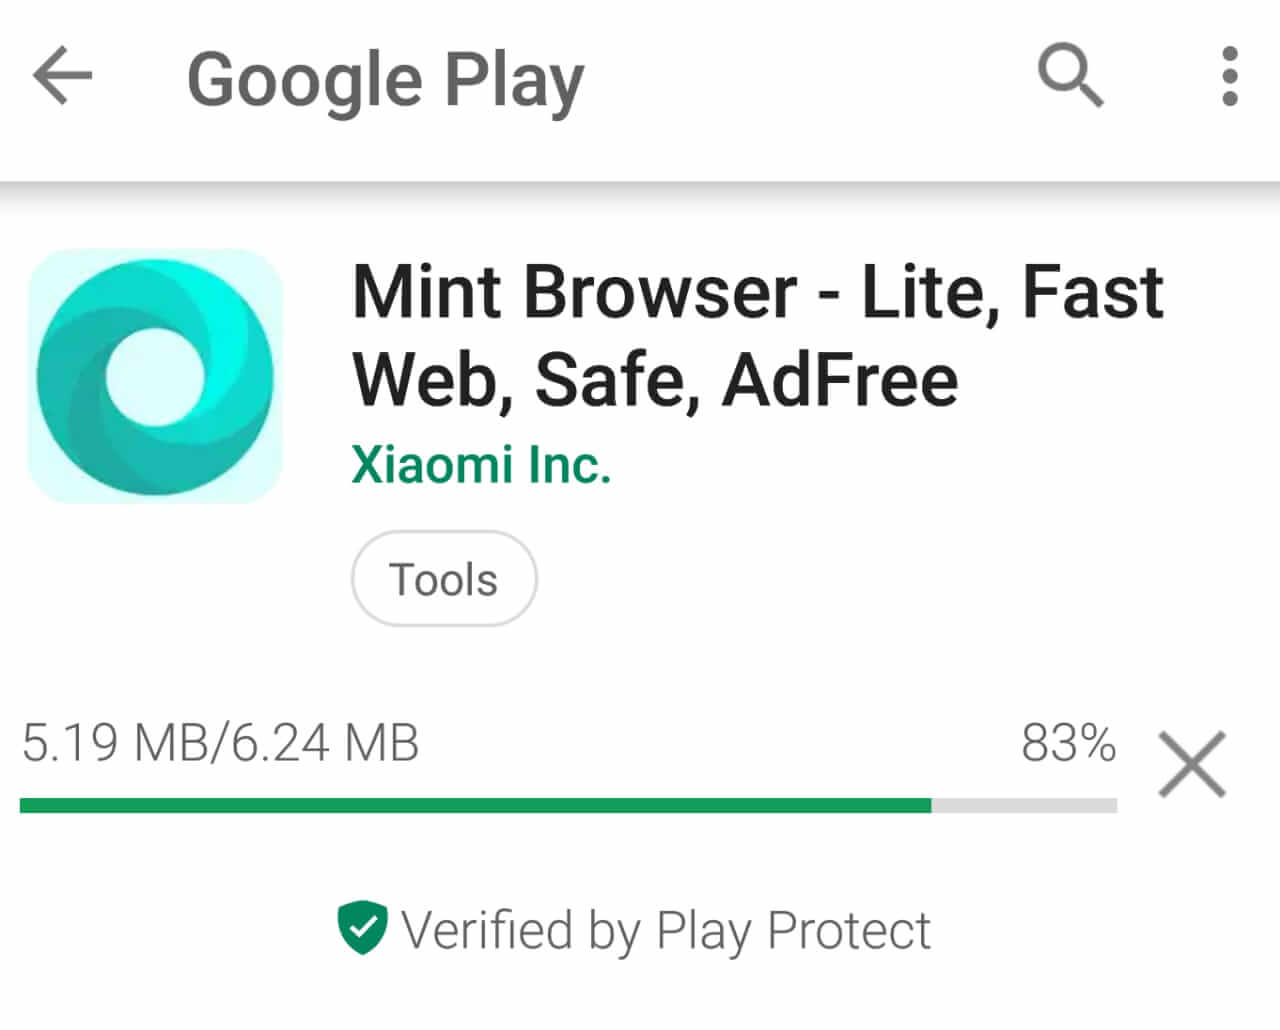 Download and Install Mint Browser App